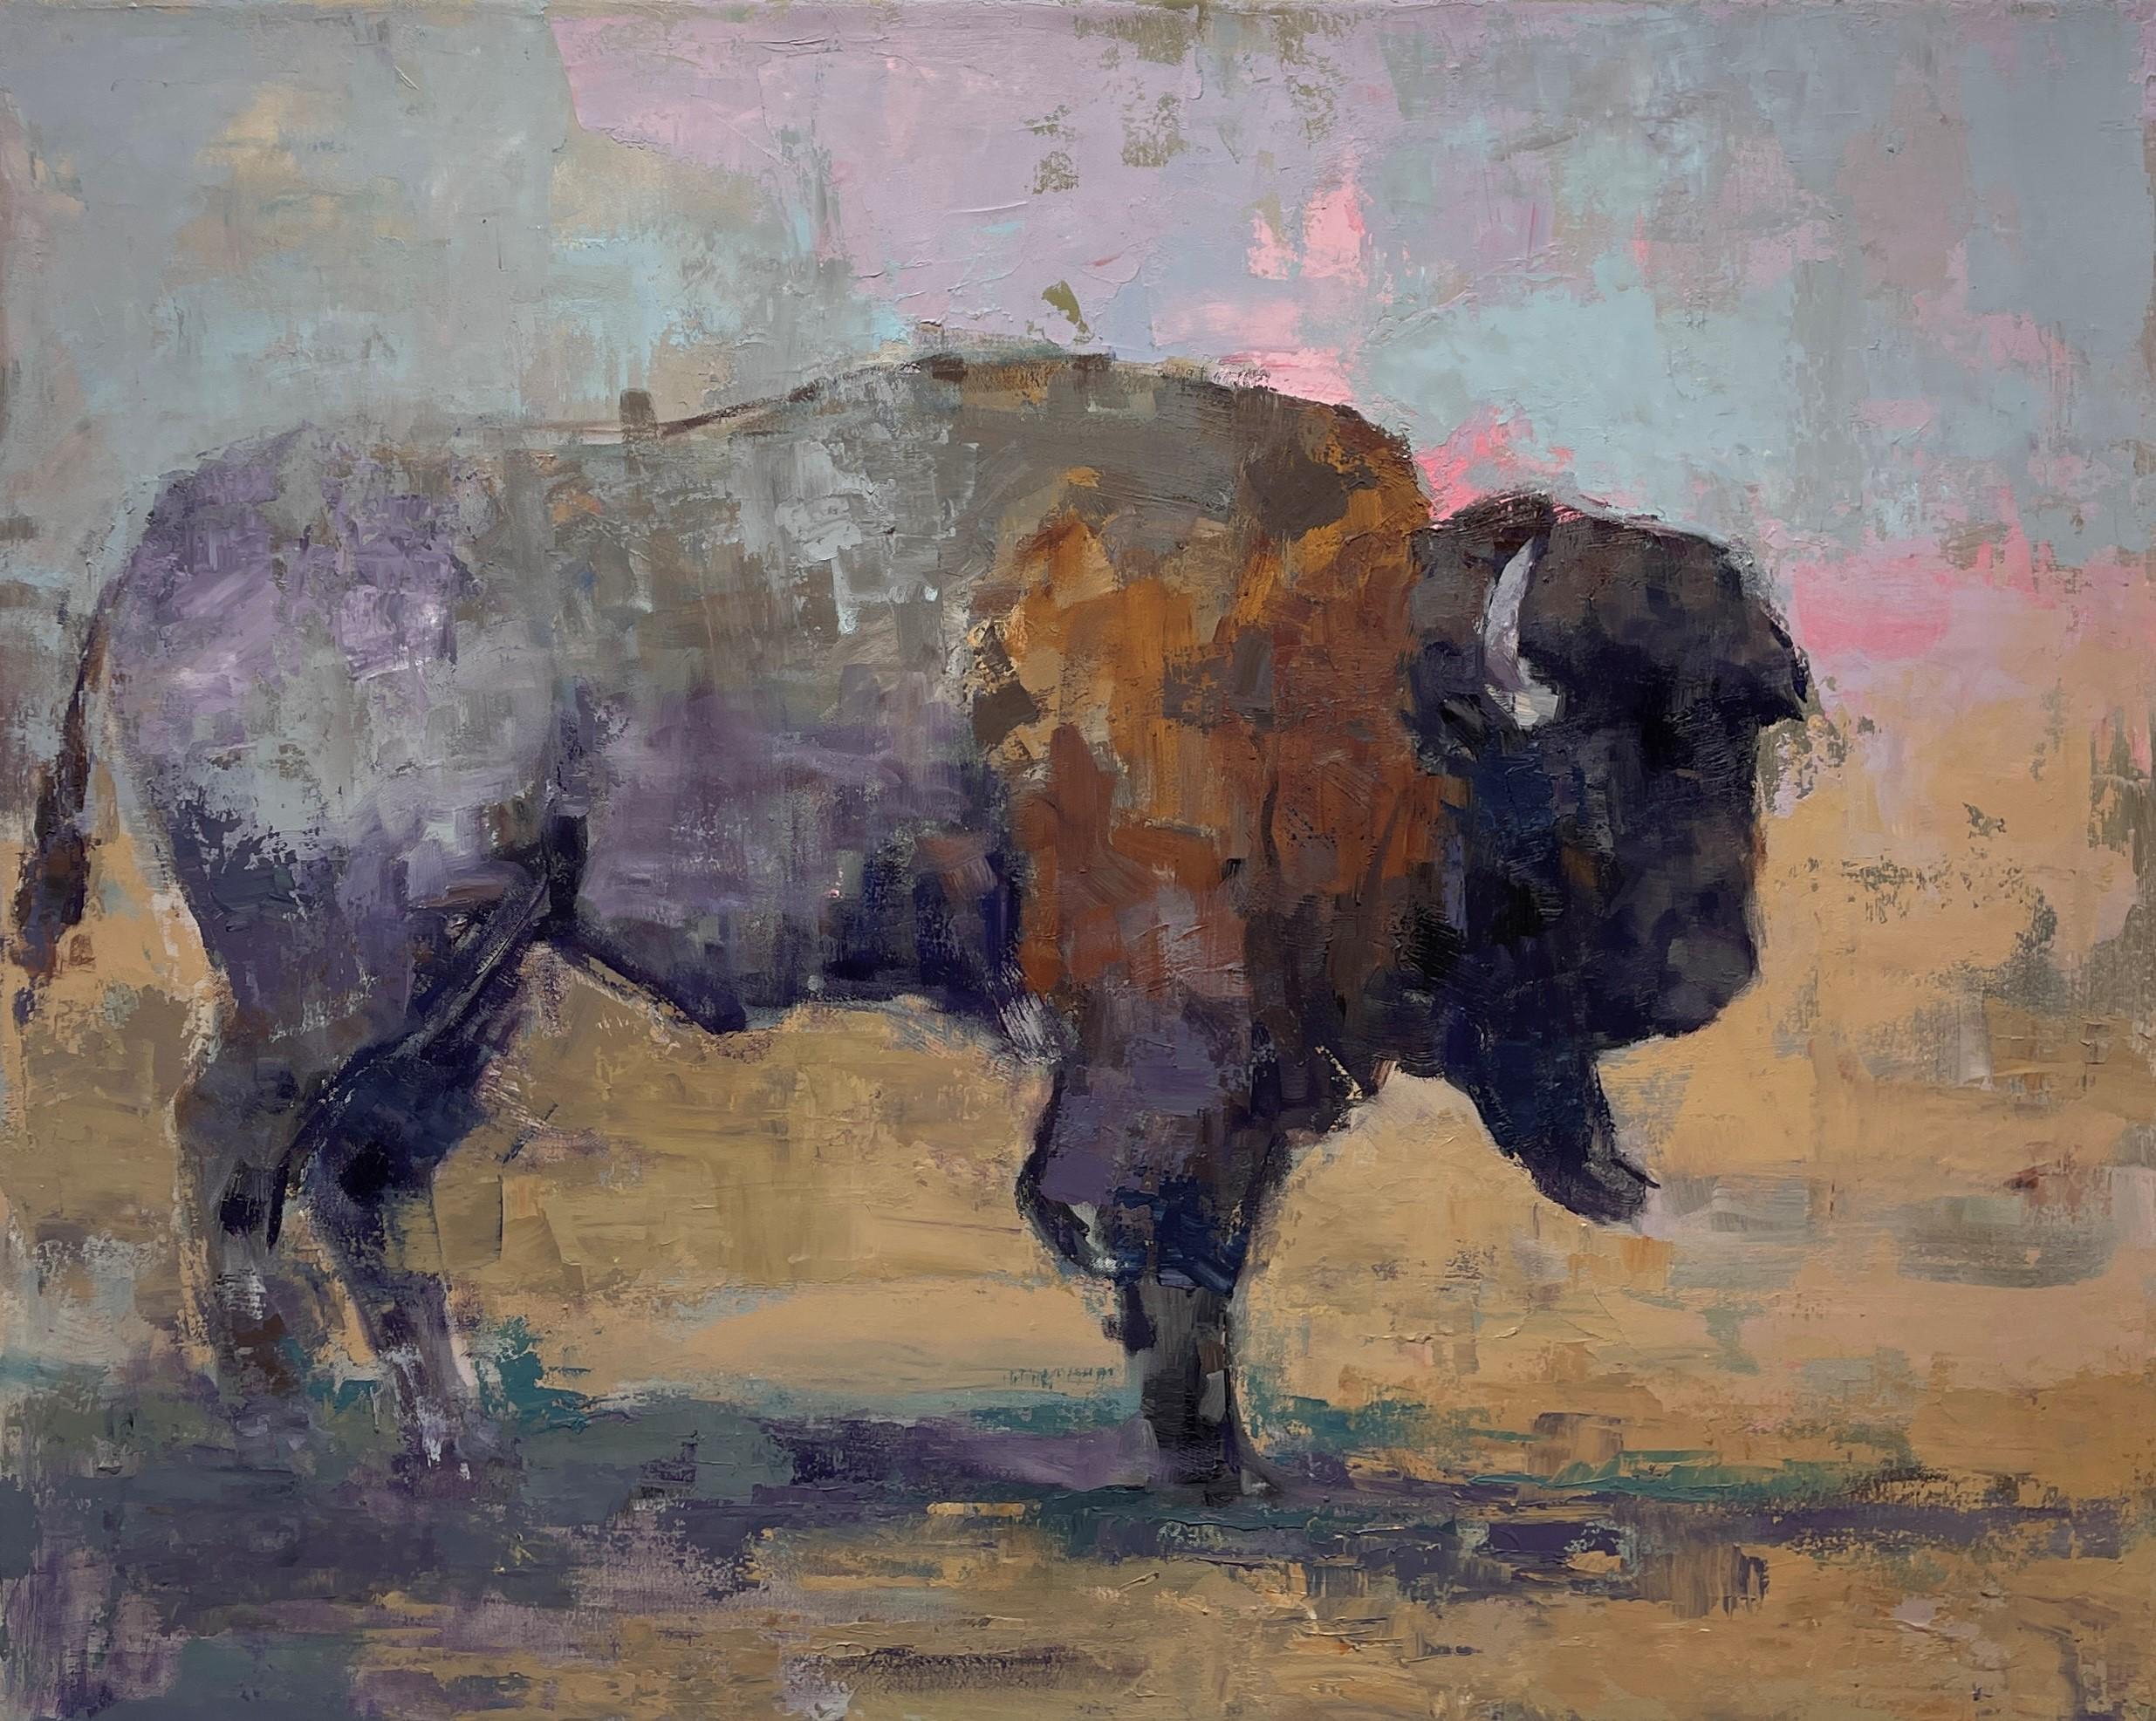 "Looks Like Sun" is an evocative original painting by Brian Keith Stephens, capturing the rugged spirit of a western buffalo. This piece, using oil and wax on cotton, measures 32 x 40 inches. The buffalo is portrayed against a backdrop of nuanced,